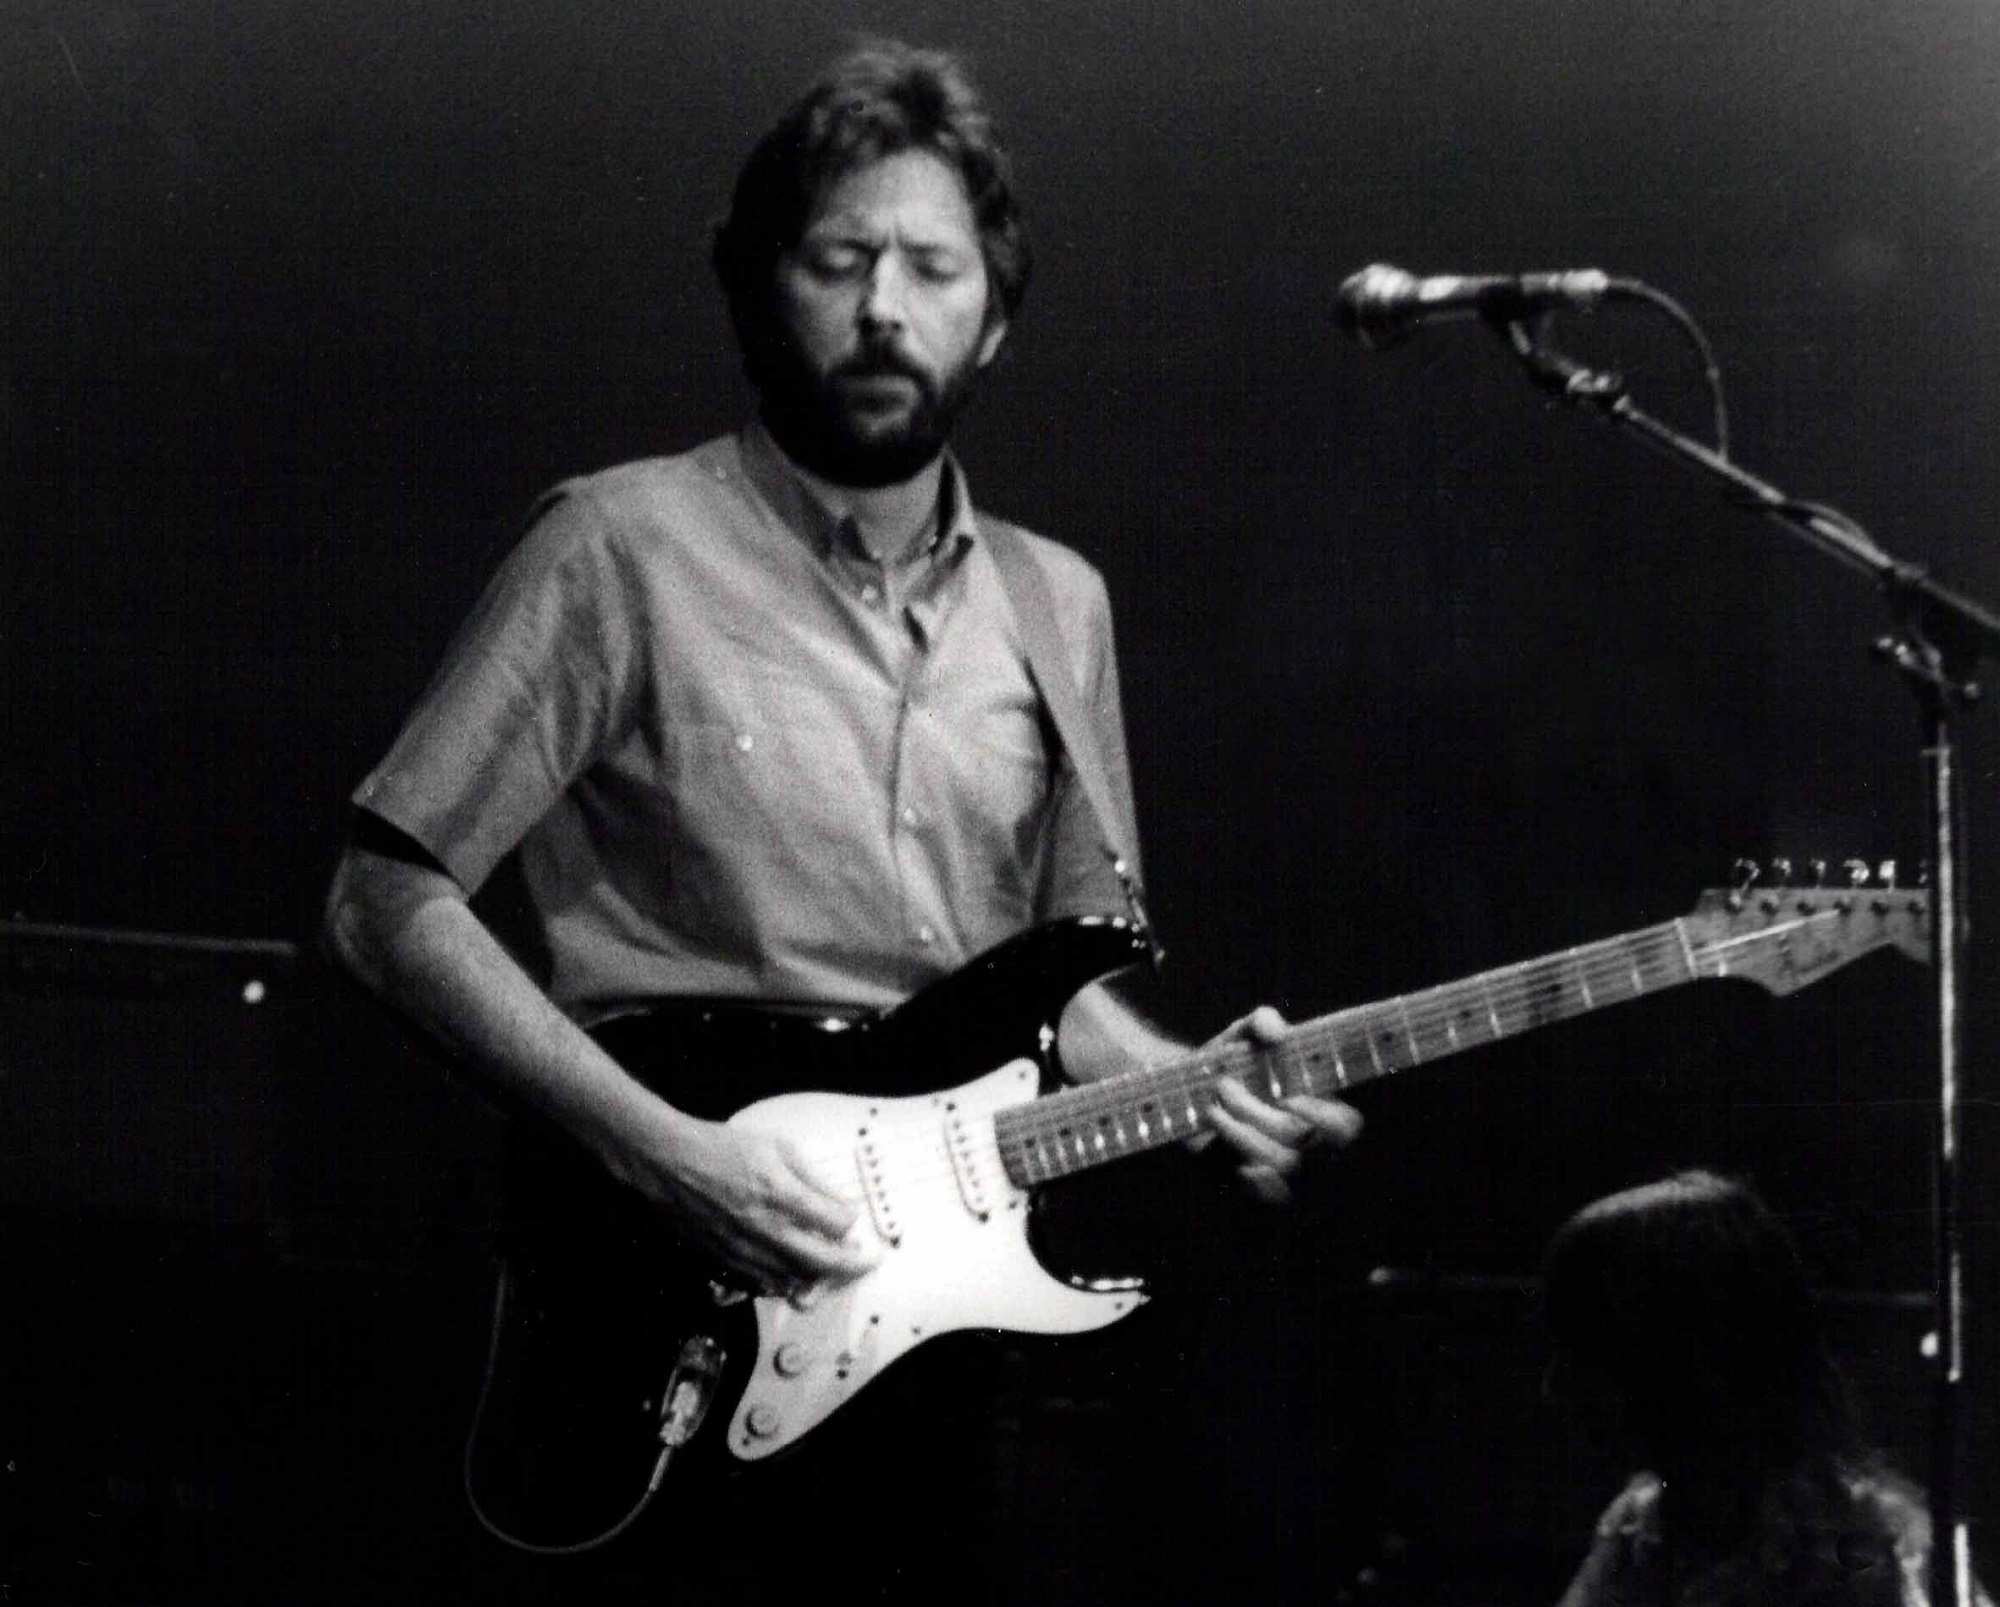 Eric Clapton's song Layla was supposed to win back his love